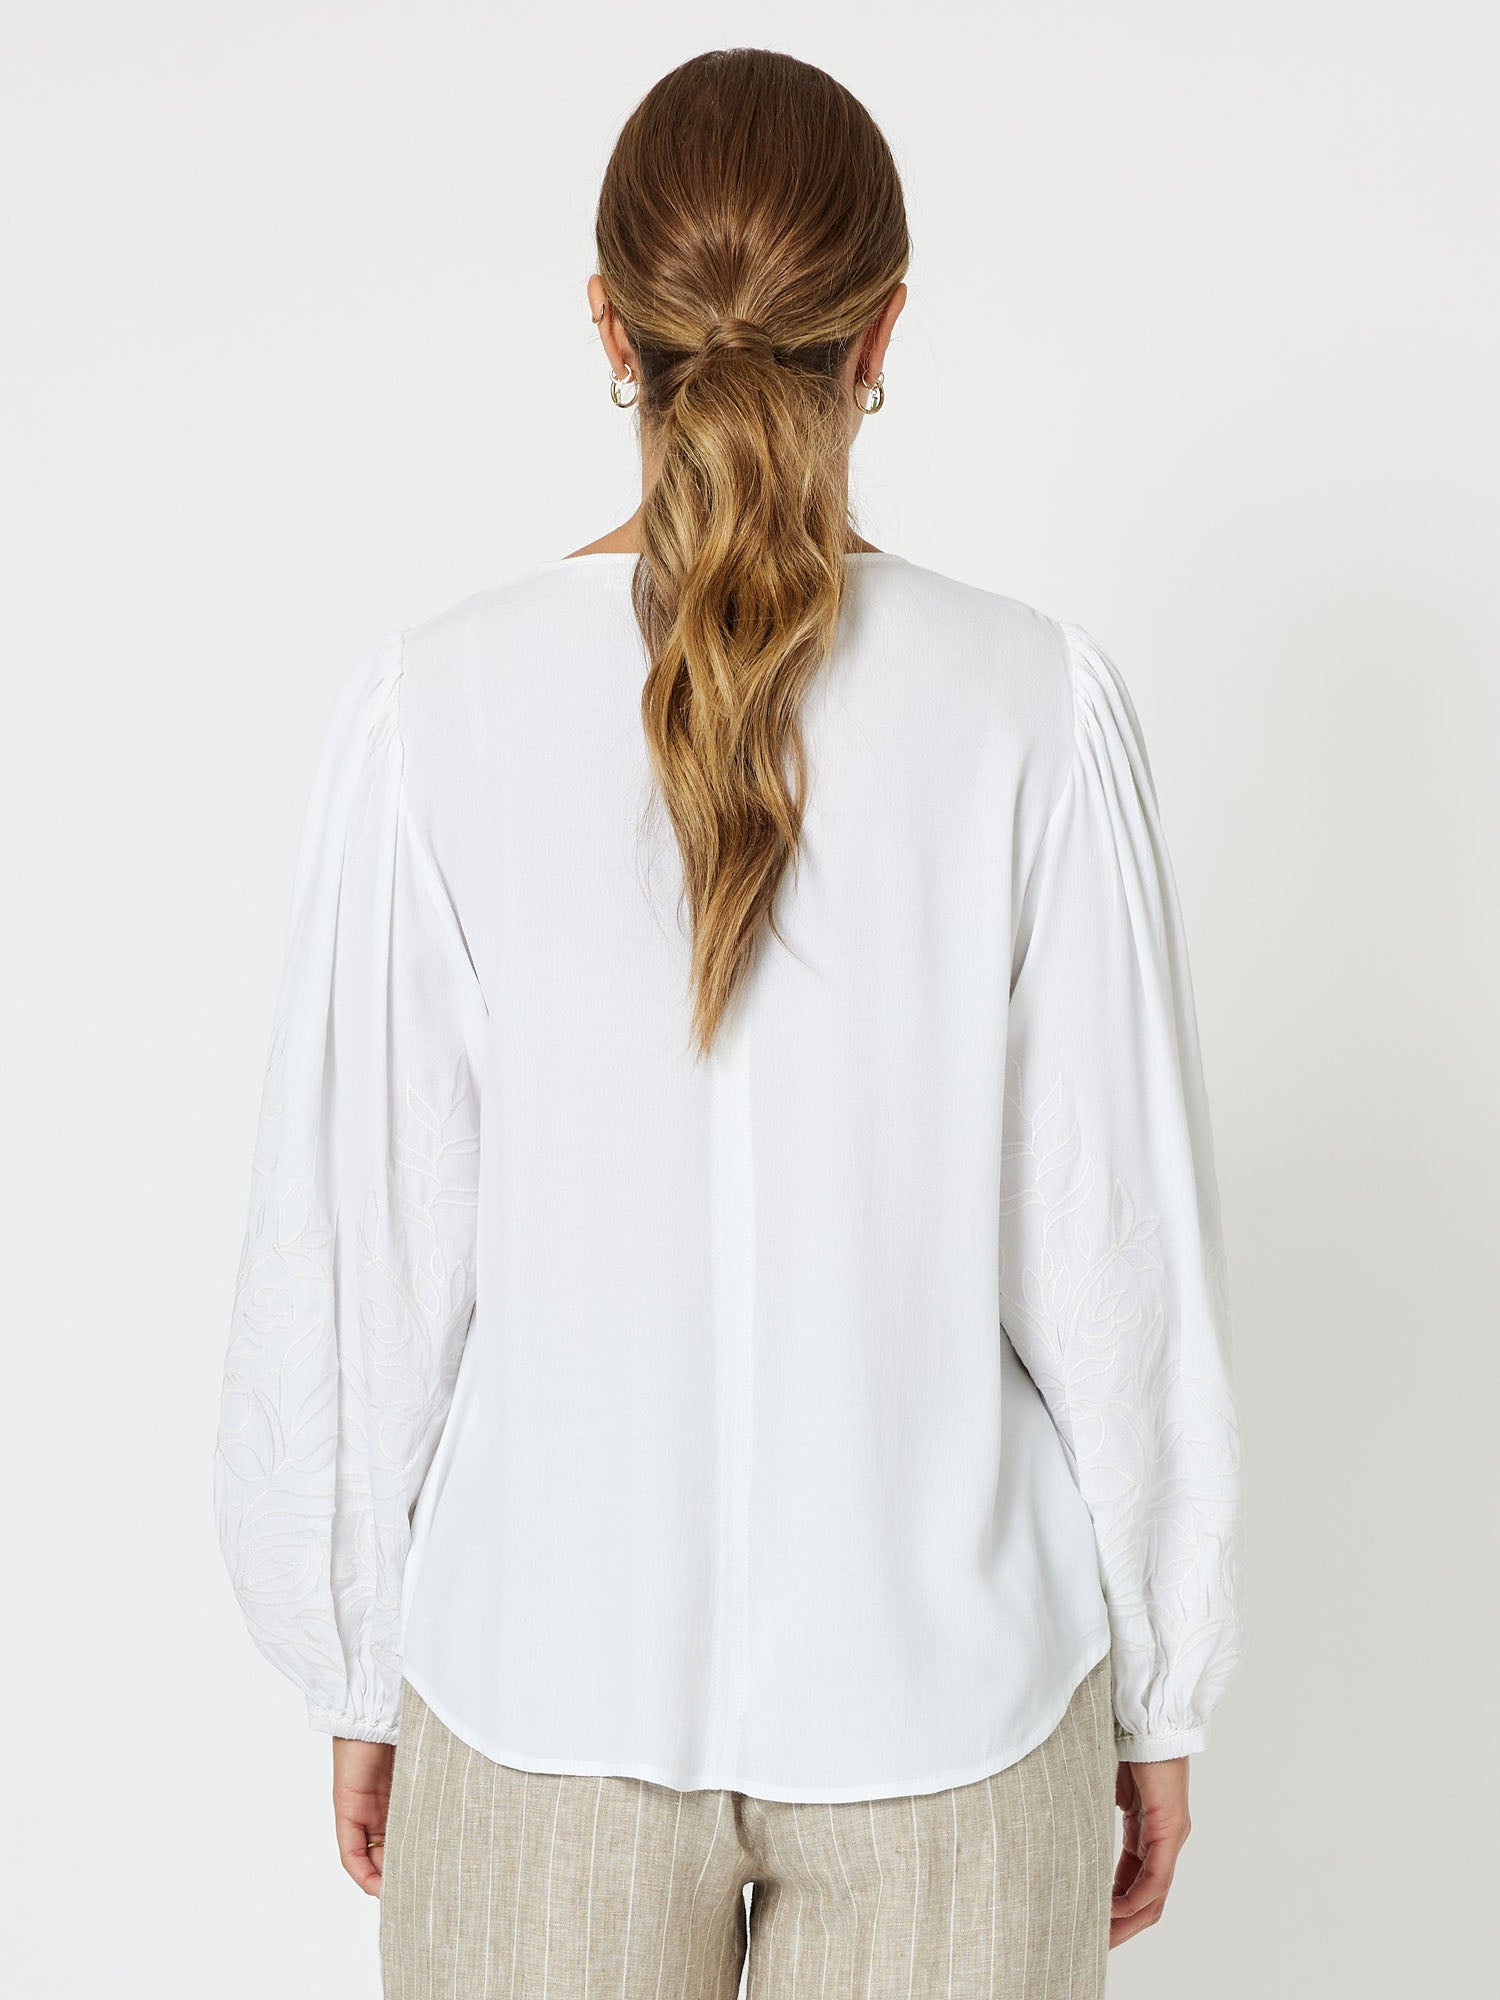 Saint Germain Embroidered Top - White